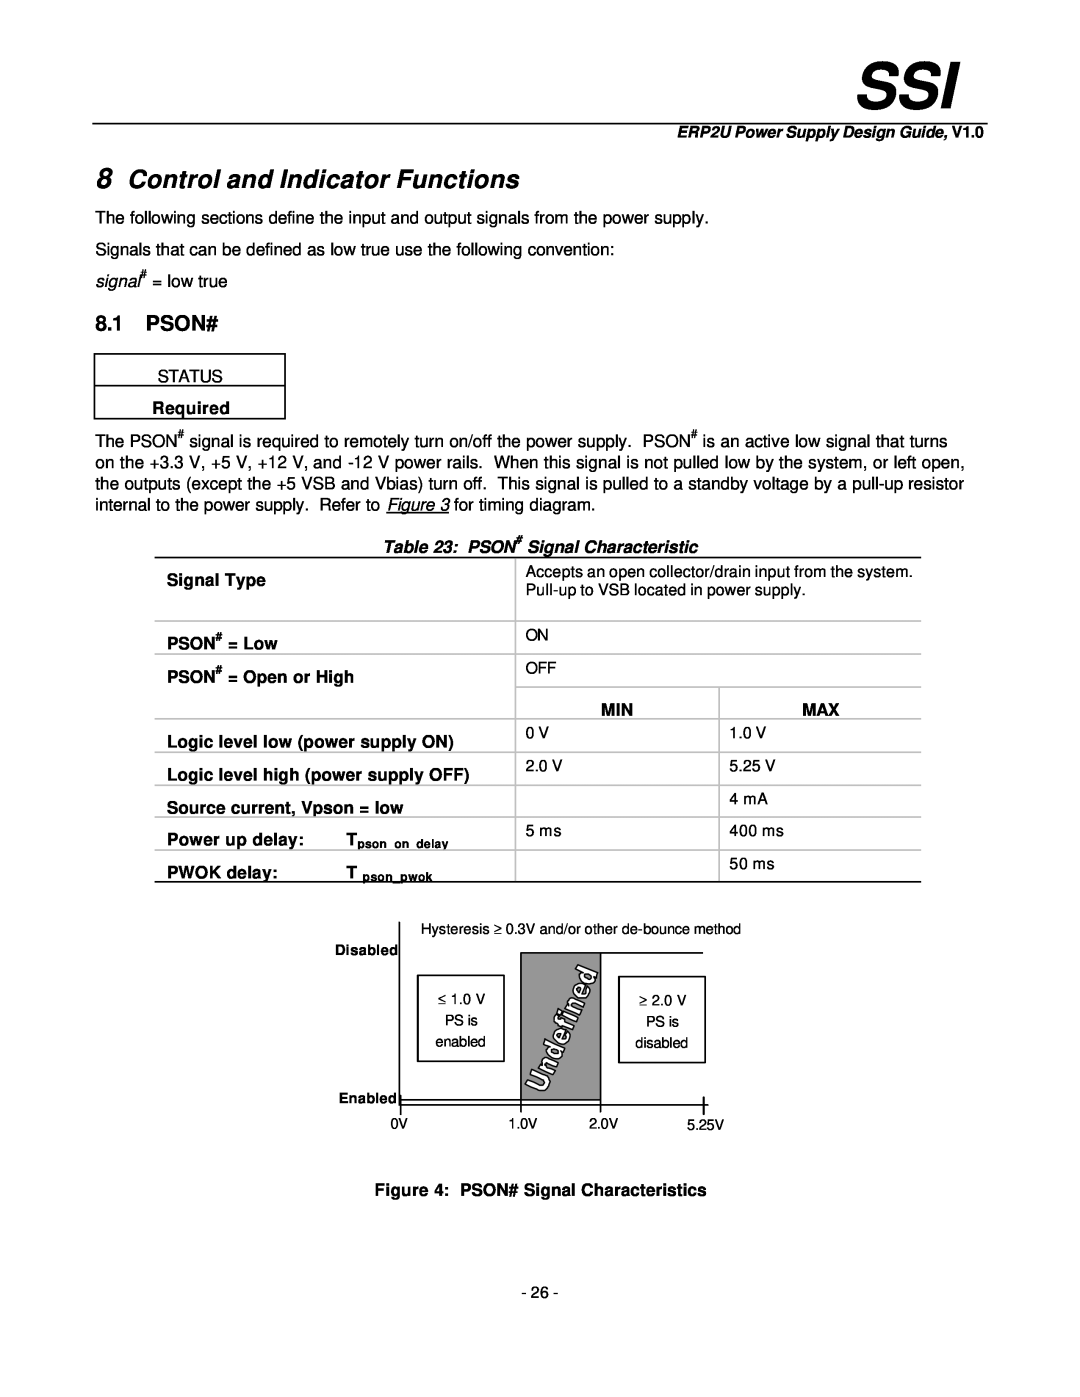 Intel ERP2U manual Control and Indicator Functions, Pson# 